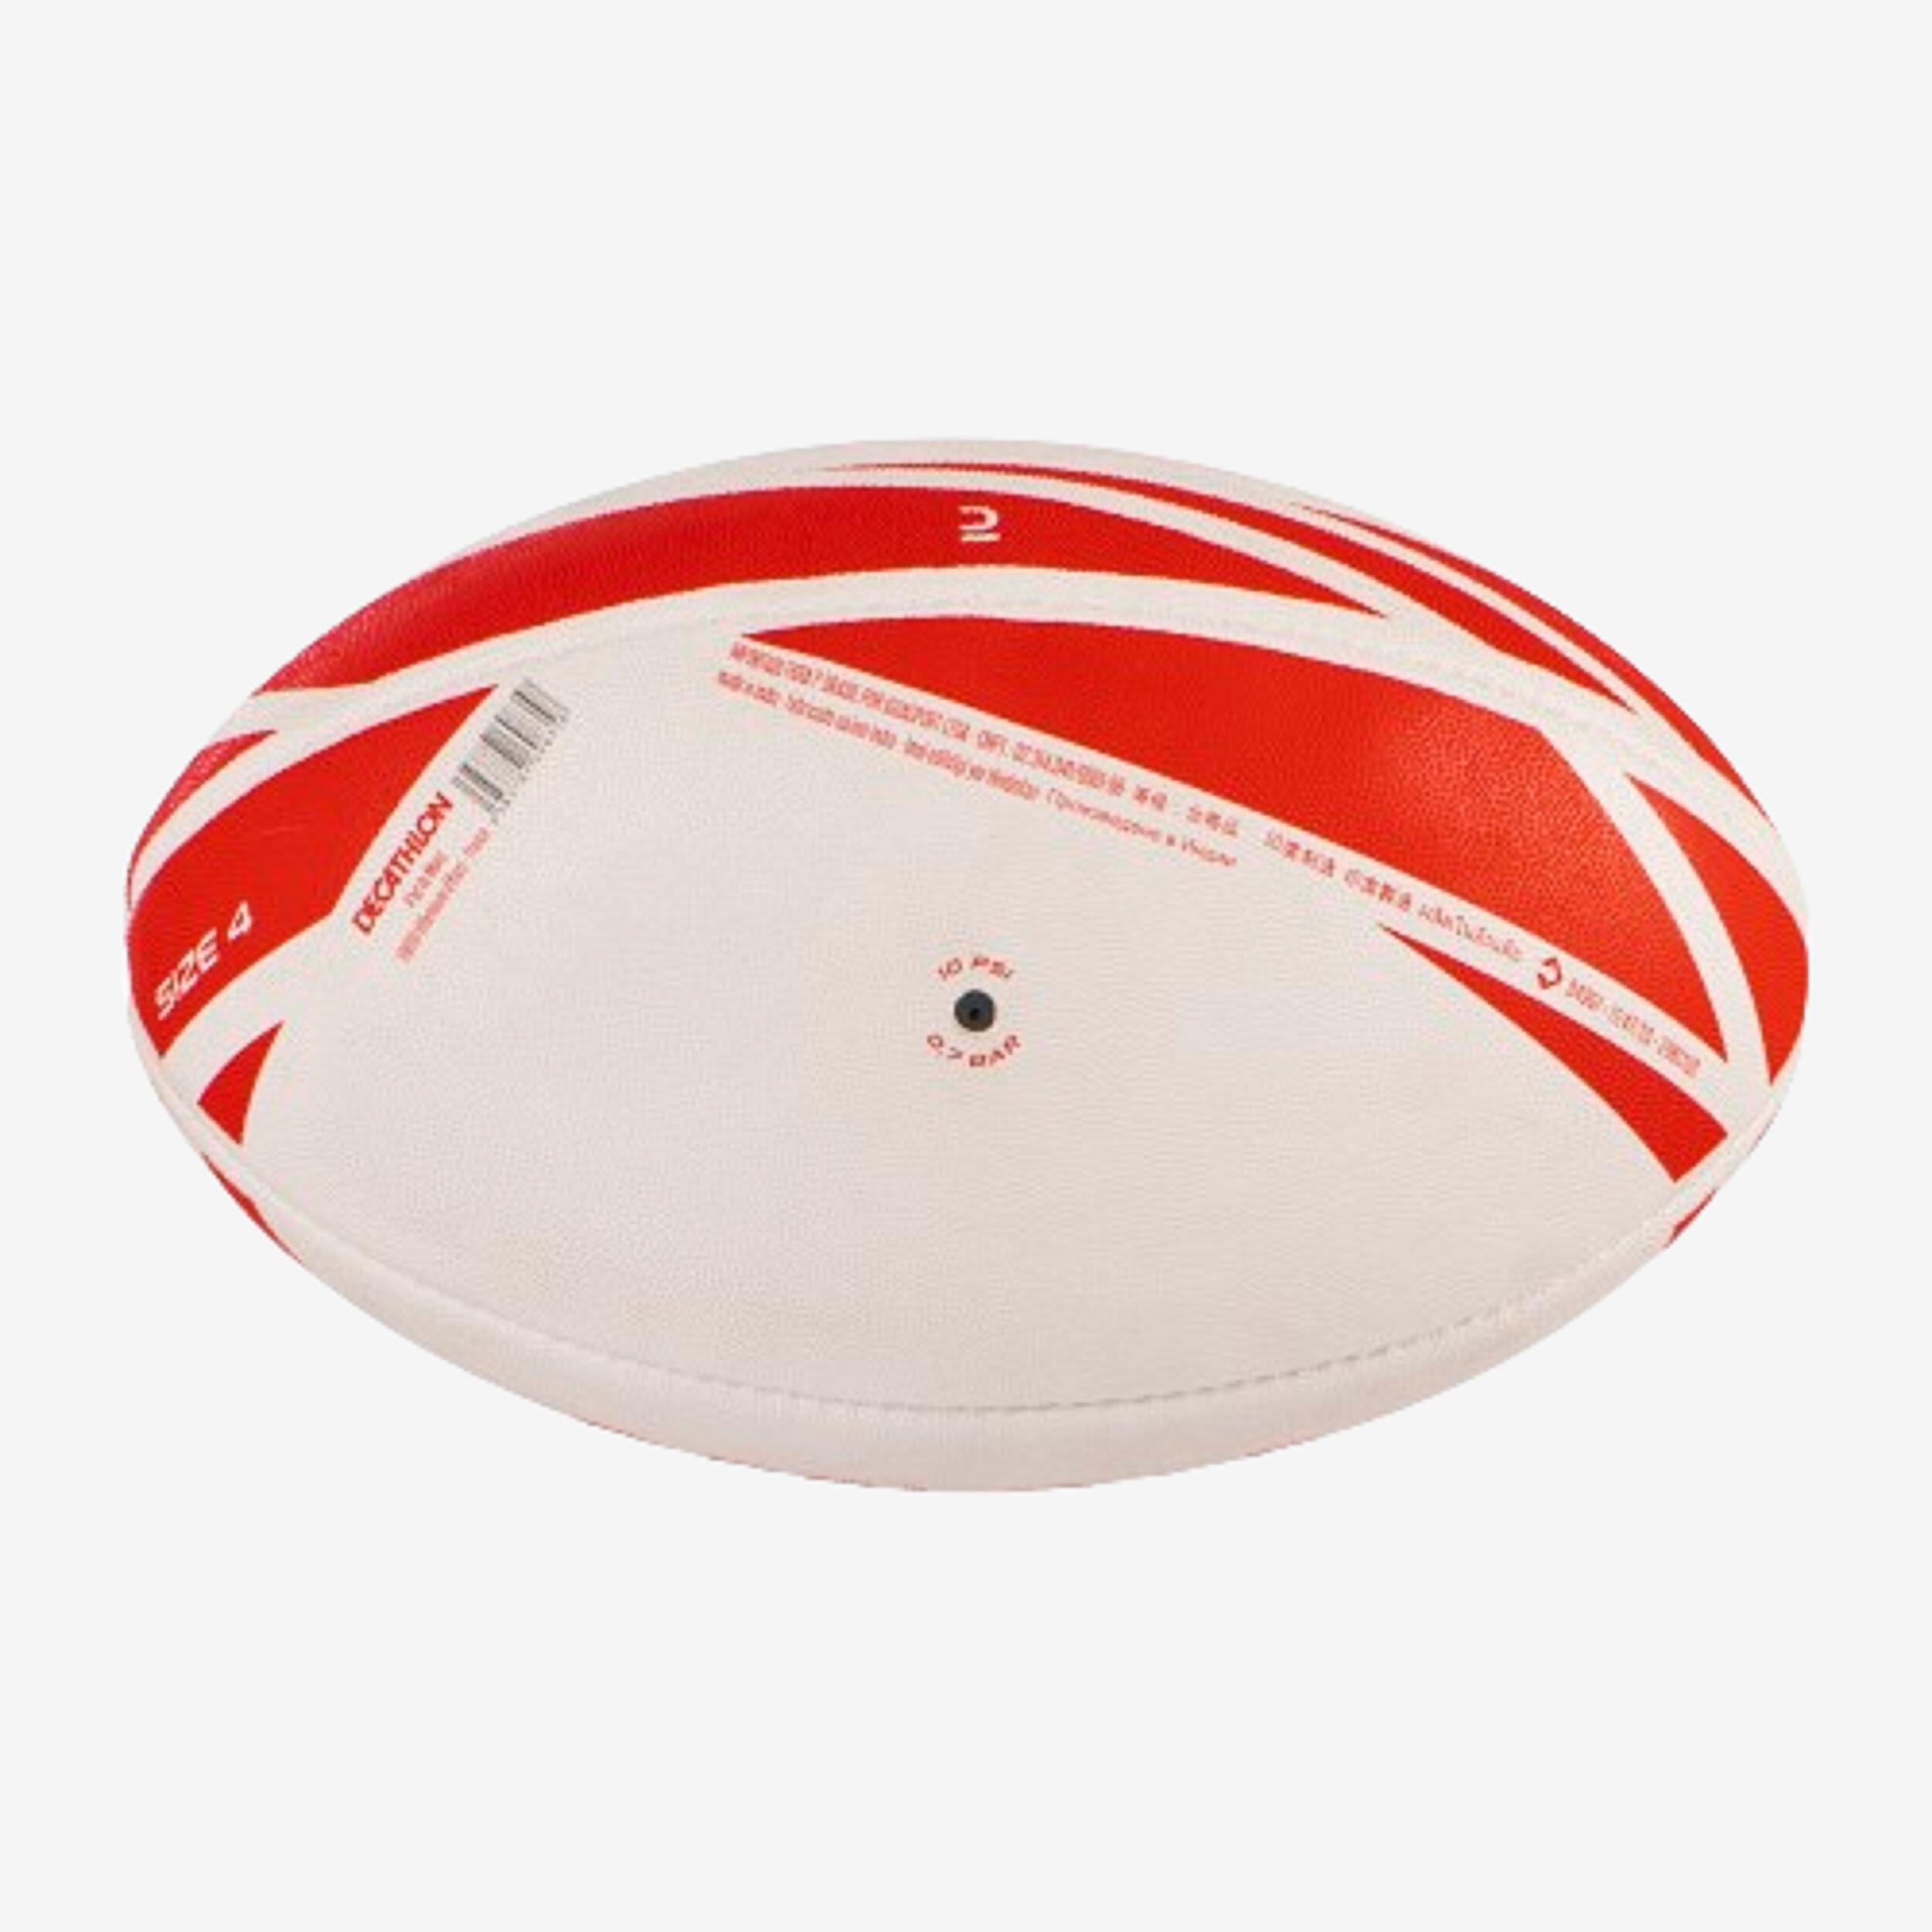 Ballon de rugby taille 4 – R100 rouge - OFFLOAD